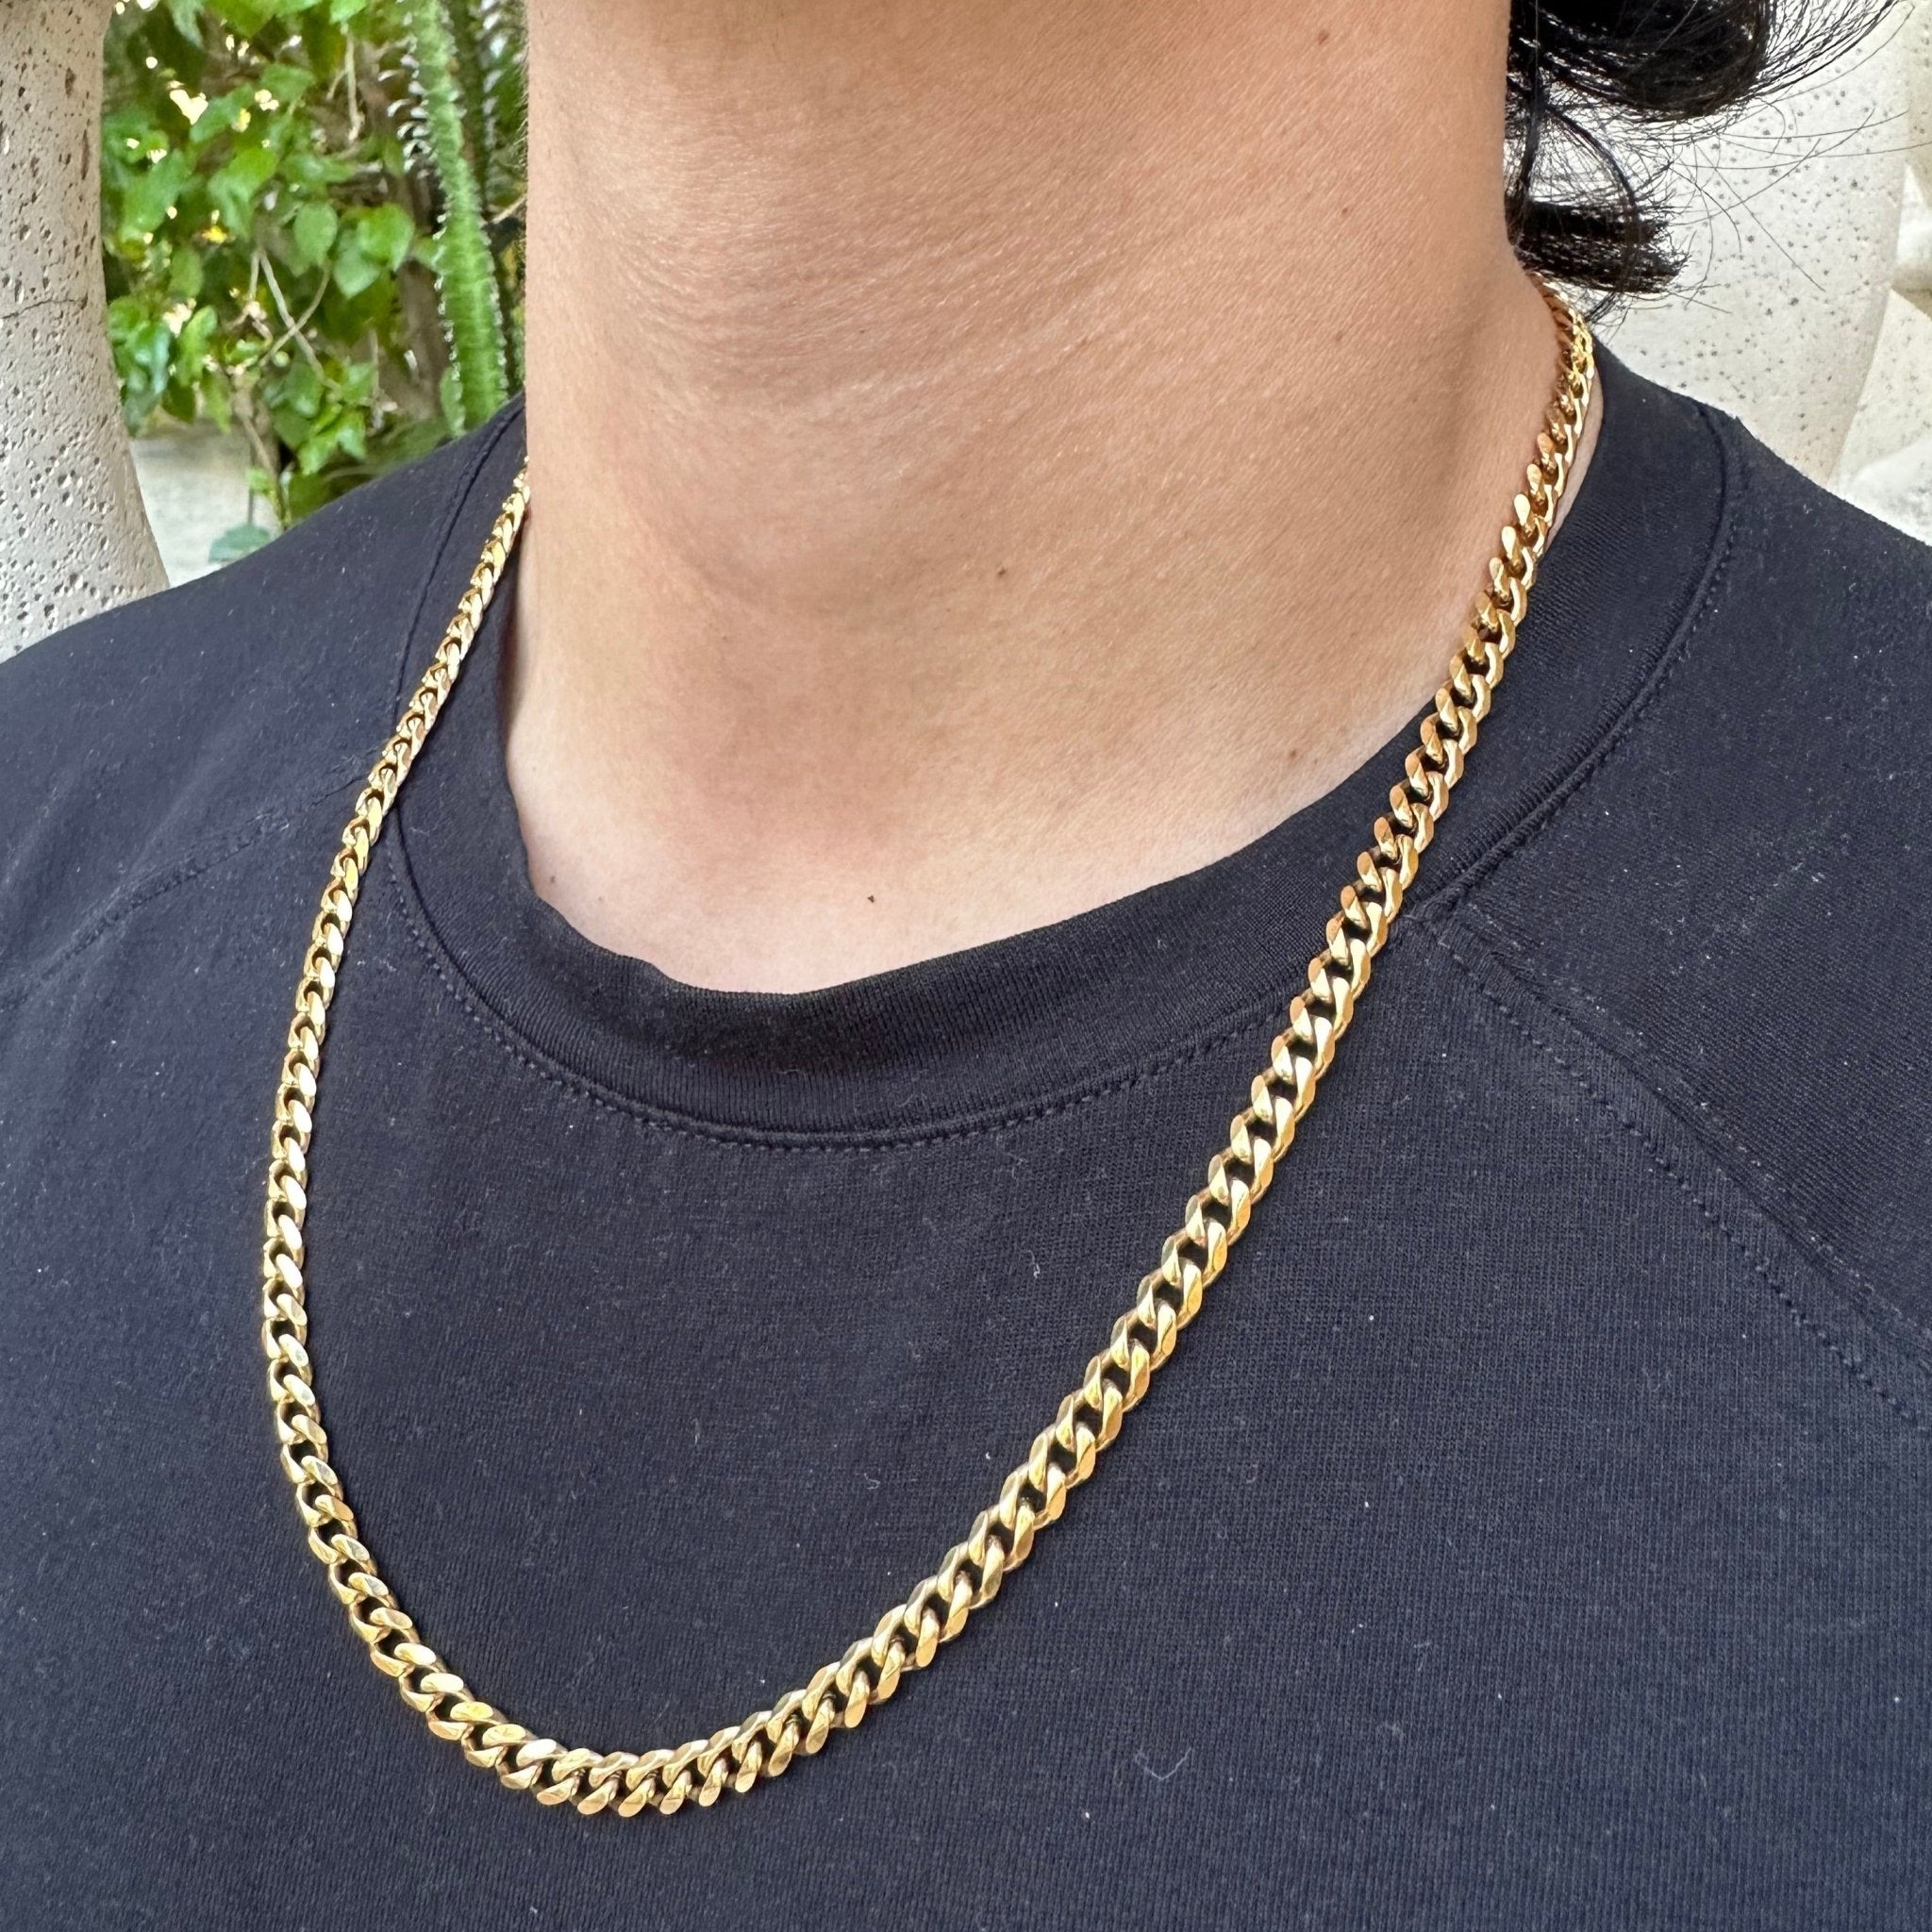 Men's Curb Chain Stamped Necklace